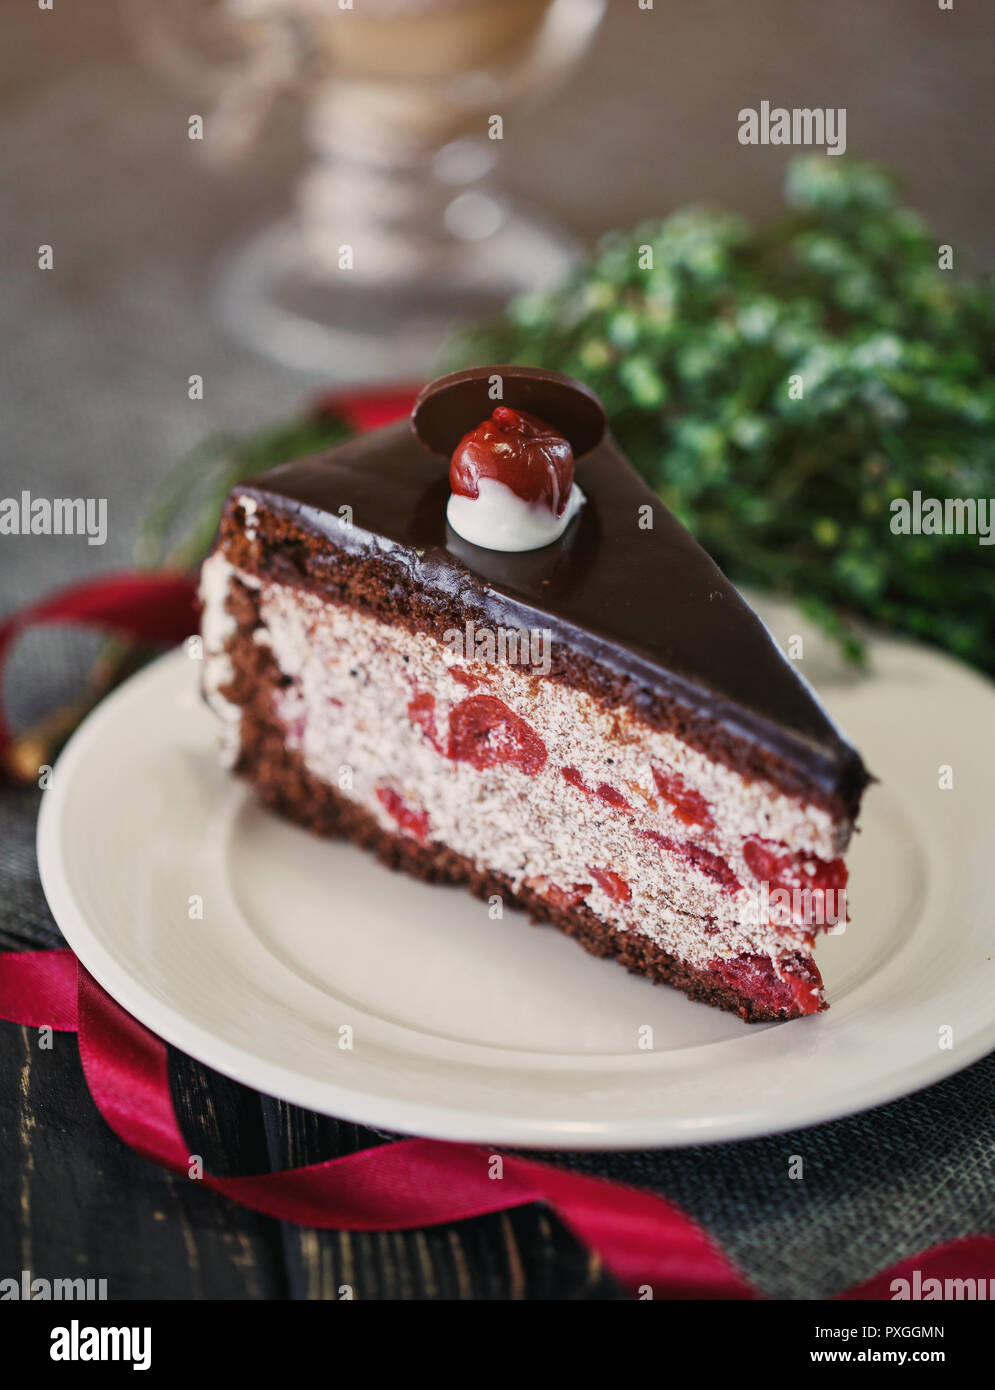 A piece of chocolate cake with cherries Stock Photo